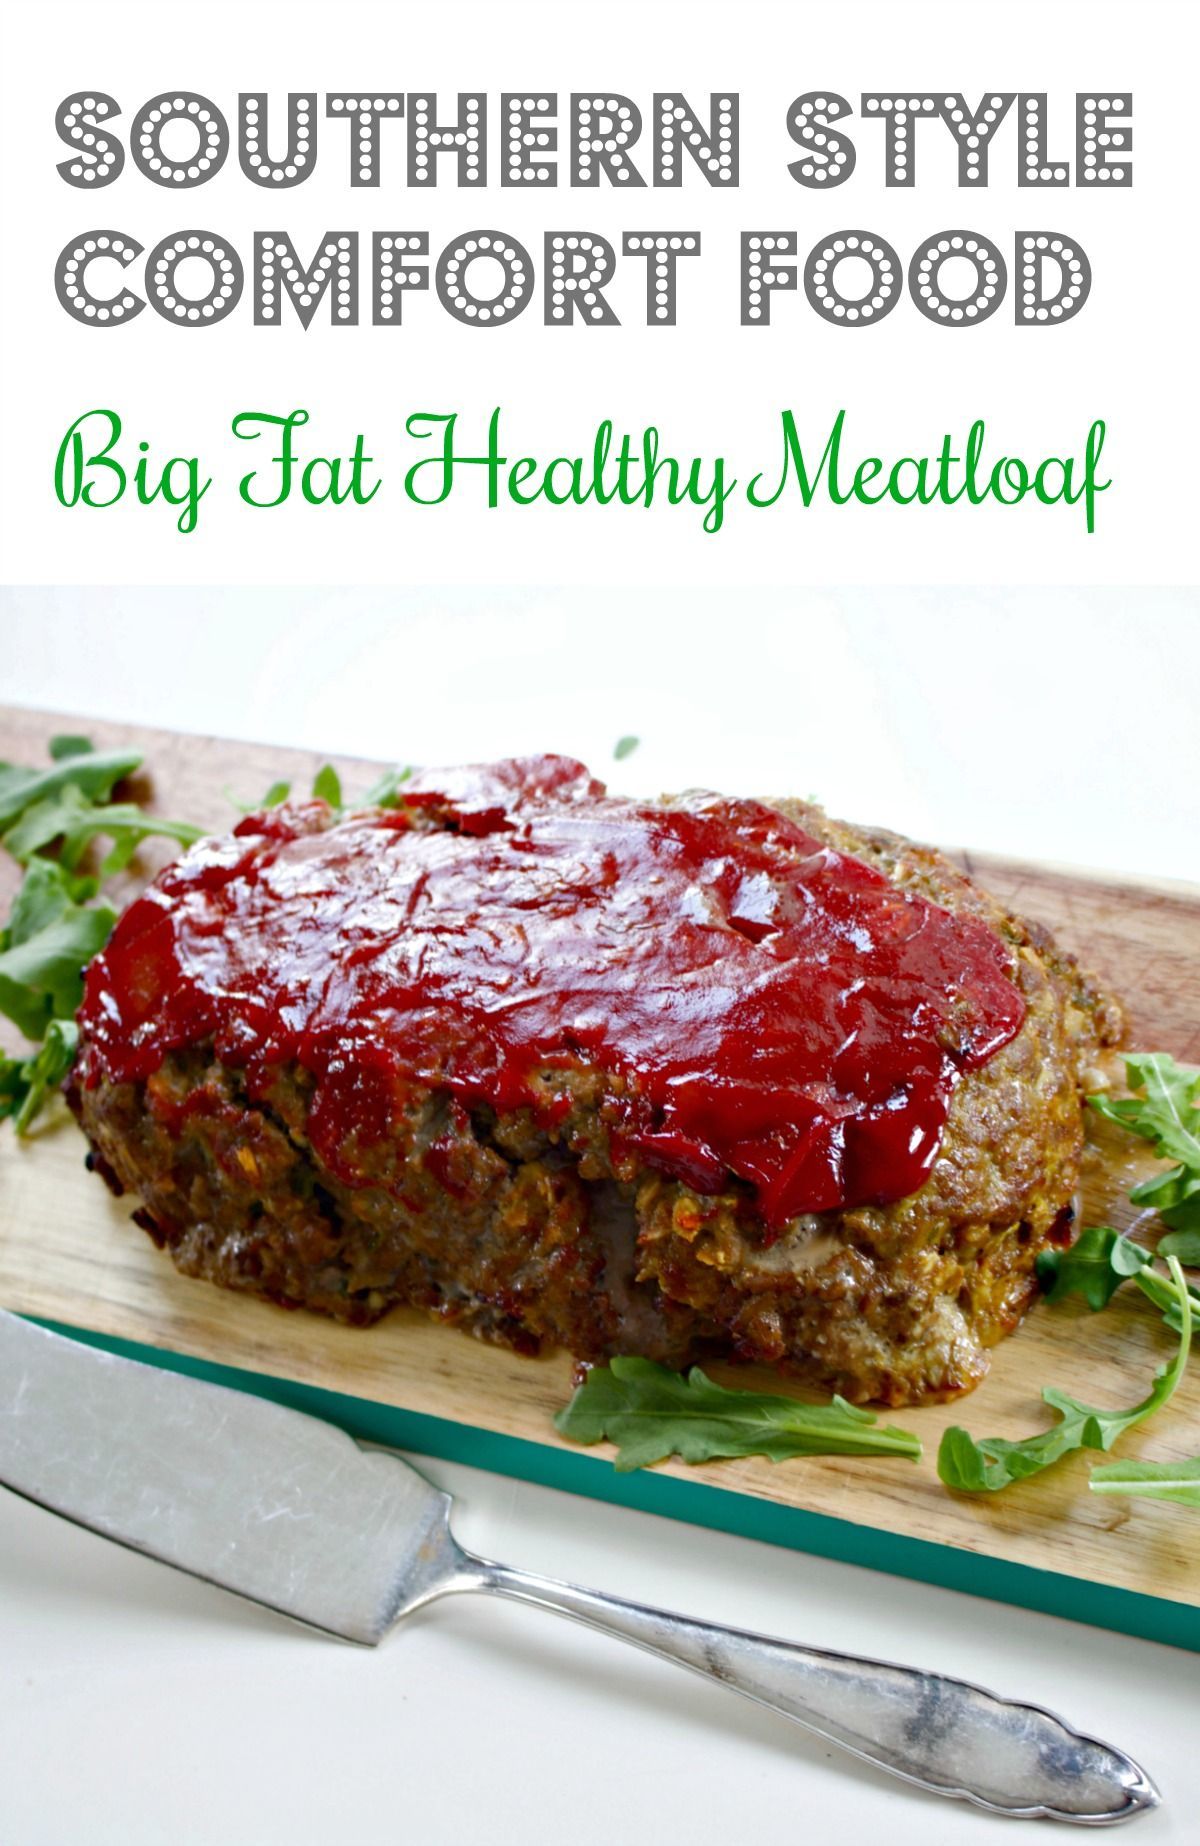 Big Fat Healthy Southern Meatloaf, Made with Oats -   21 southern meatloaf recipes
 ideas